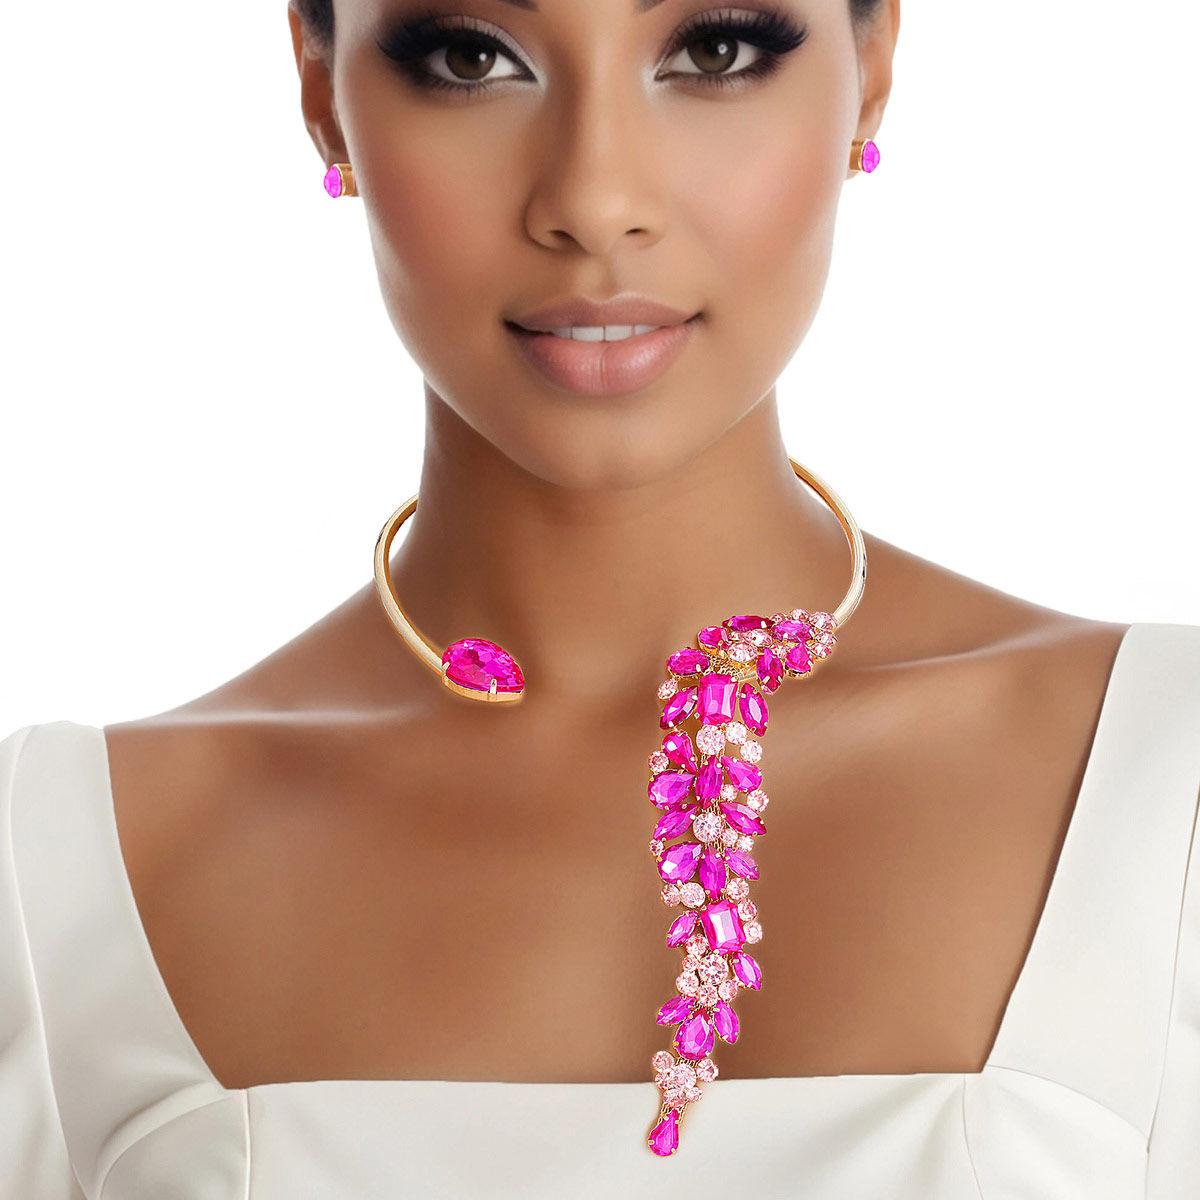 Shine Bright: Pink Rhinestone Leaf Choker Necklace Set - Must-Have Accessory!